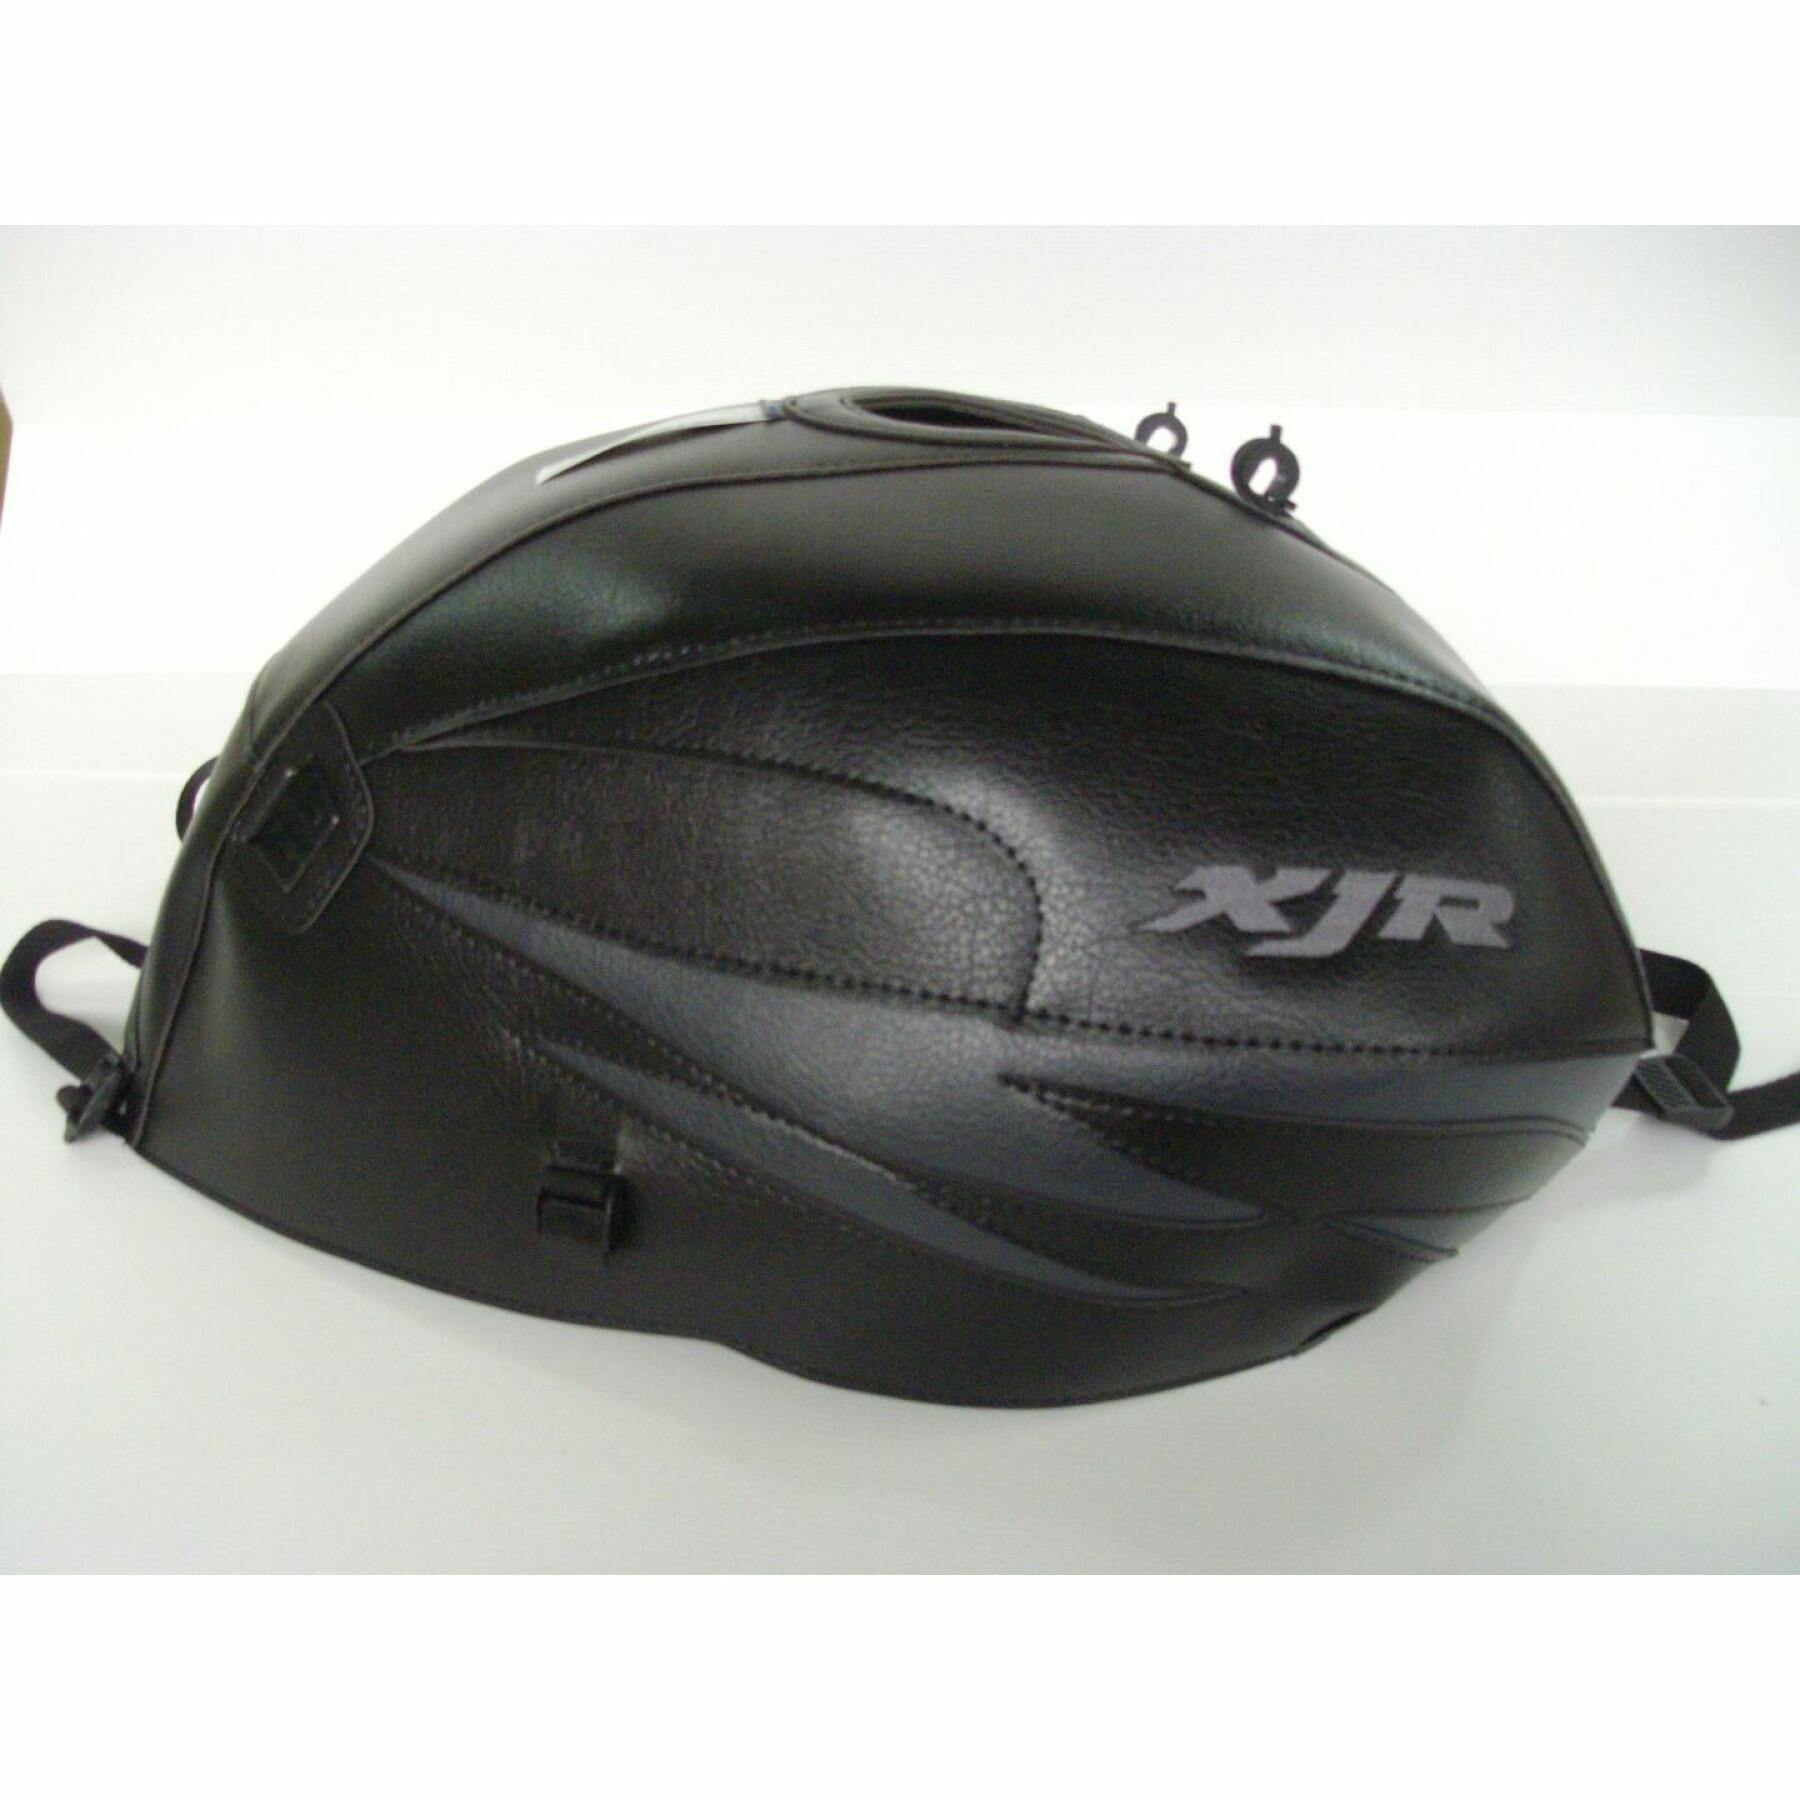 Motorcycle tank cover Bagster xjr 1300